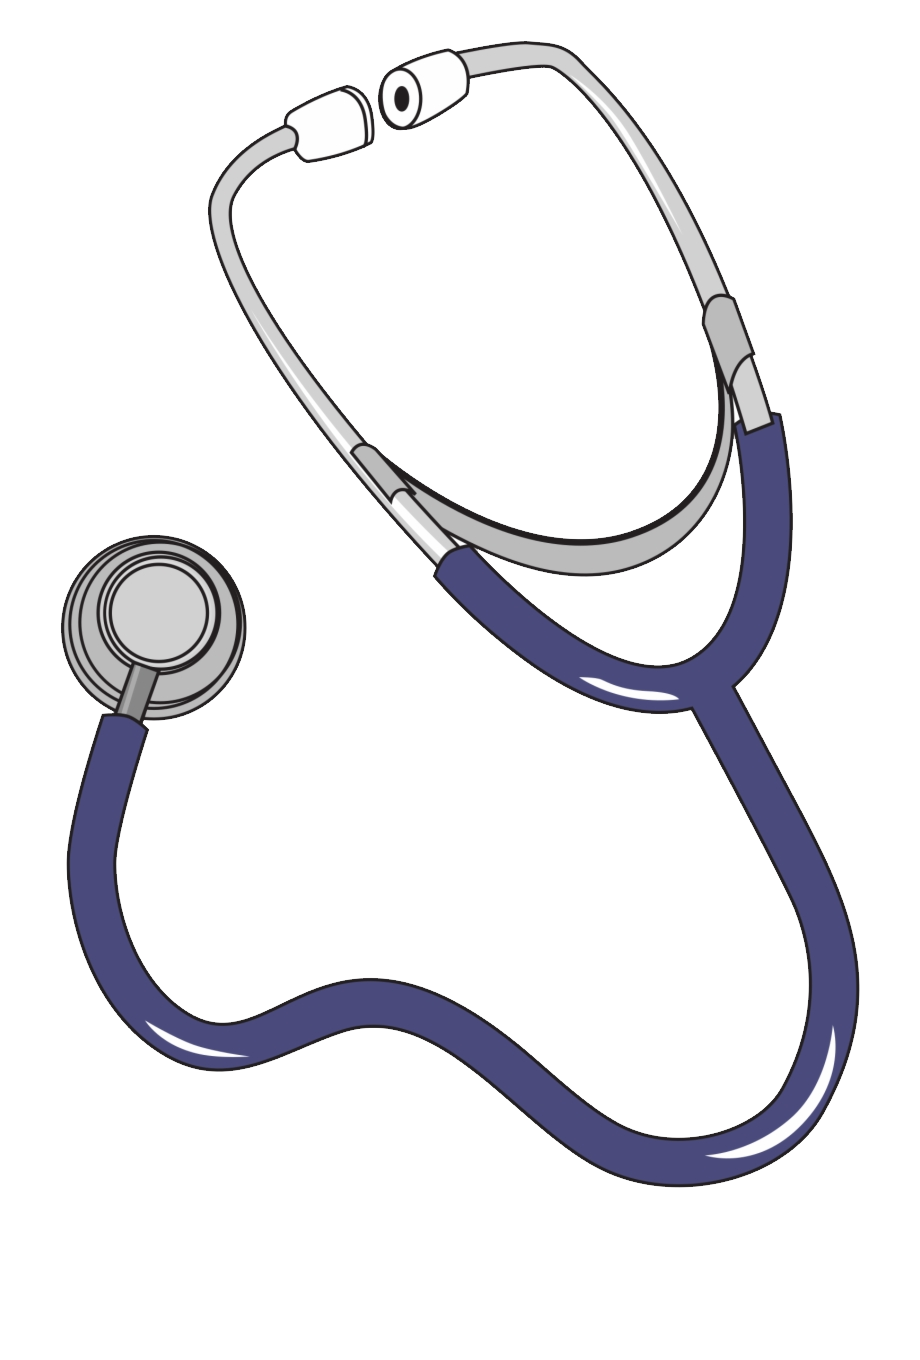 Stethoscope PNG Free File Download